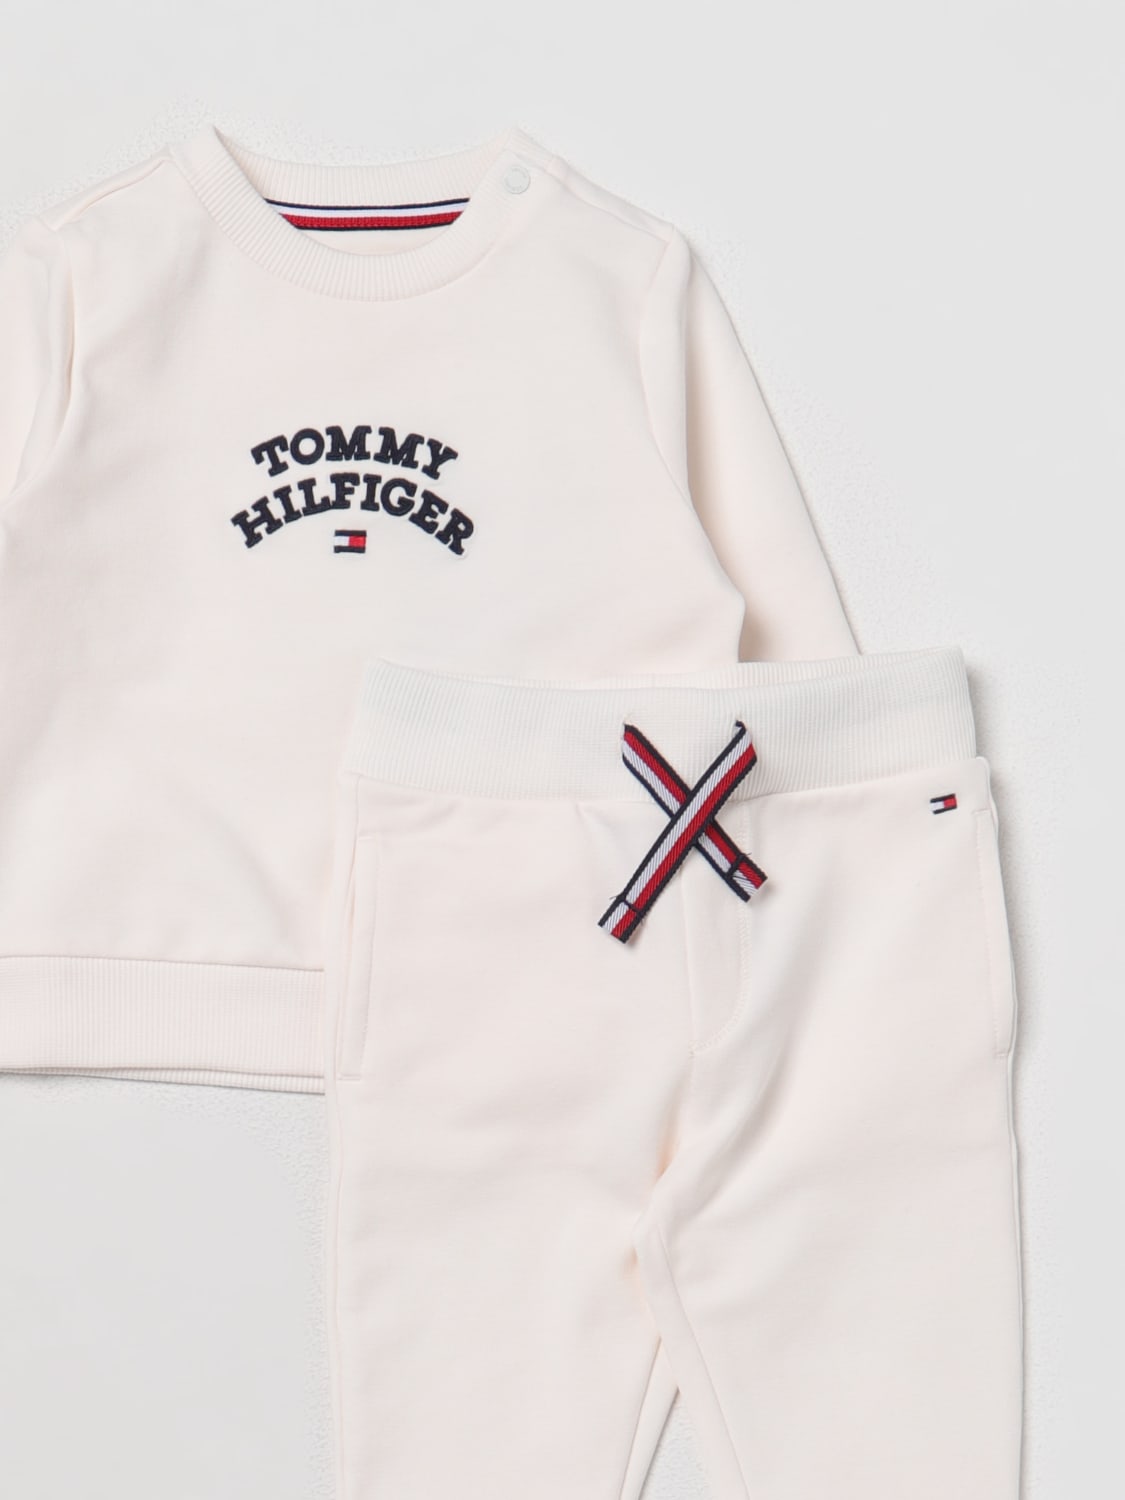 TOMMY HILFIGER: Baby Baby-Overall - Weiß | Tommy Hilfiger Baby-Overall  KN0KN01788 online auf